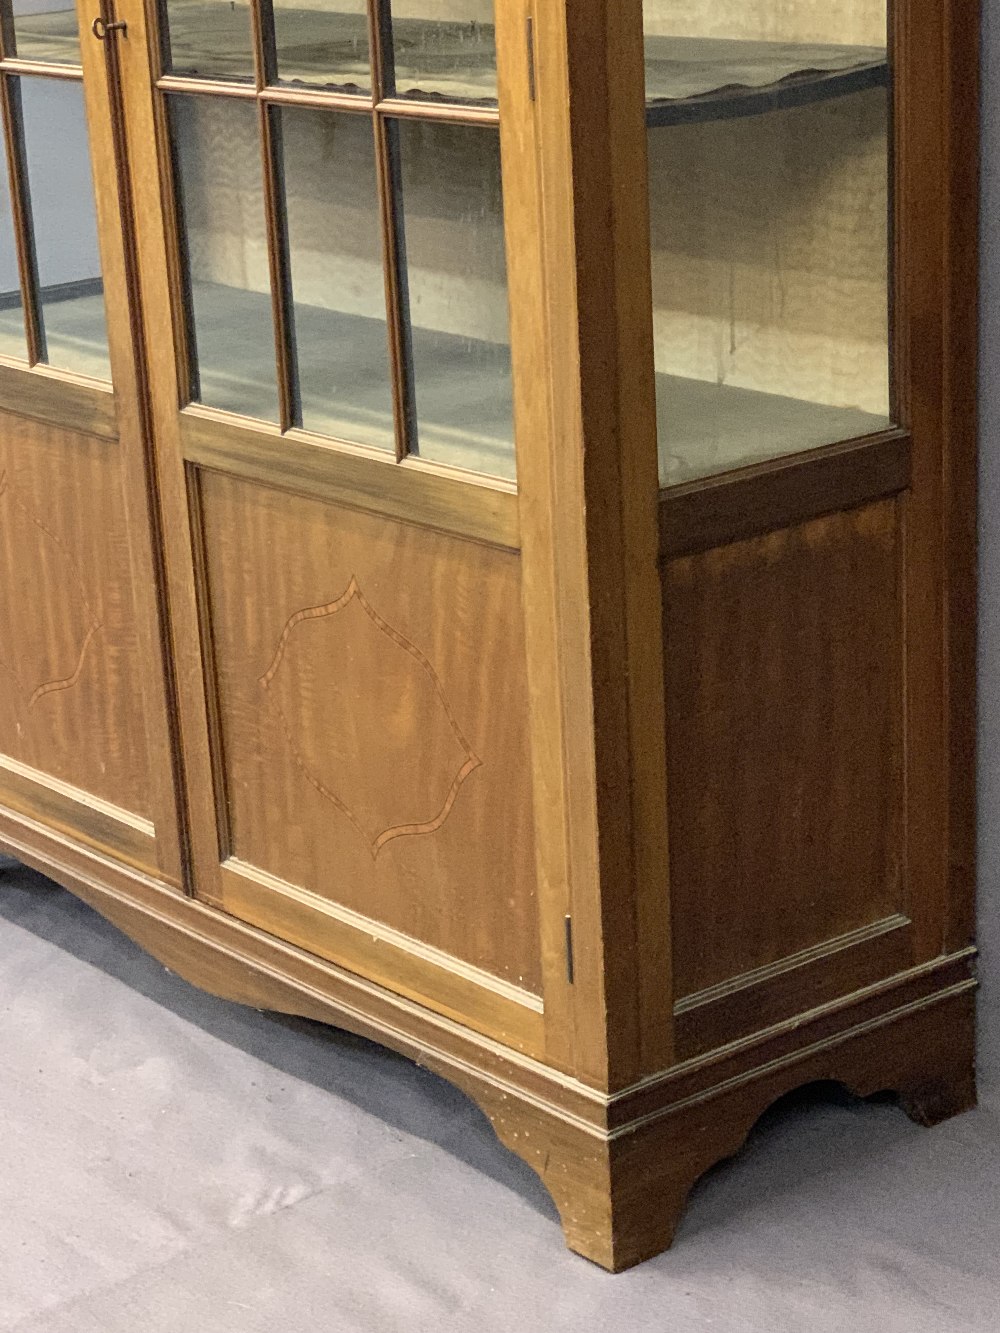 CIRCA 1900 MAHOGANY TWO DOOR CHINA DISPLAY CABINET - with dentil detail to the cornice and string - Image 6 of 7